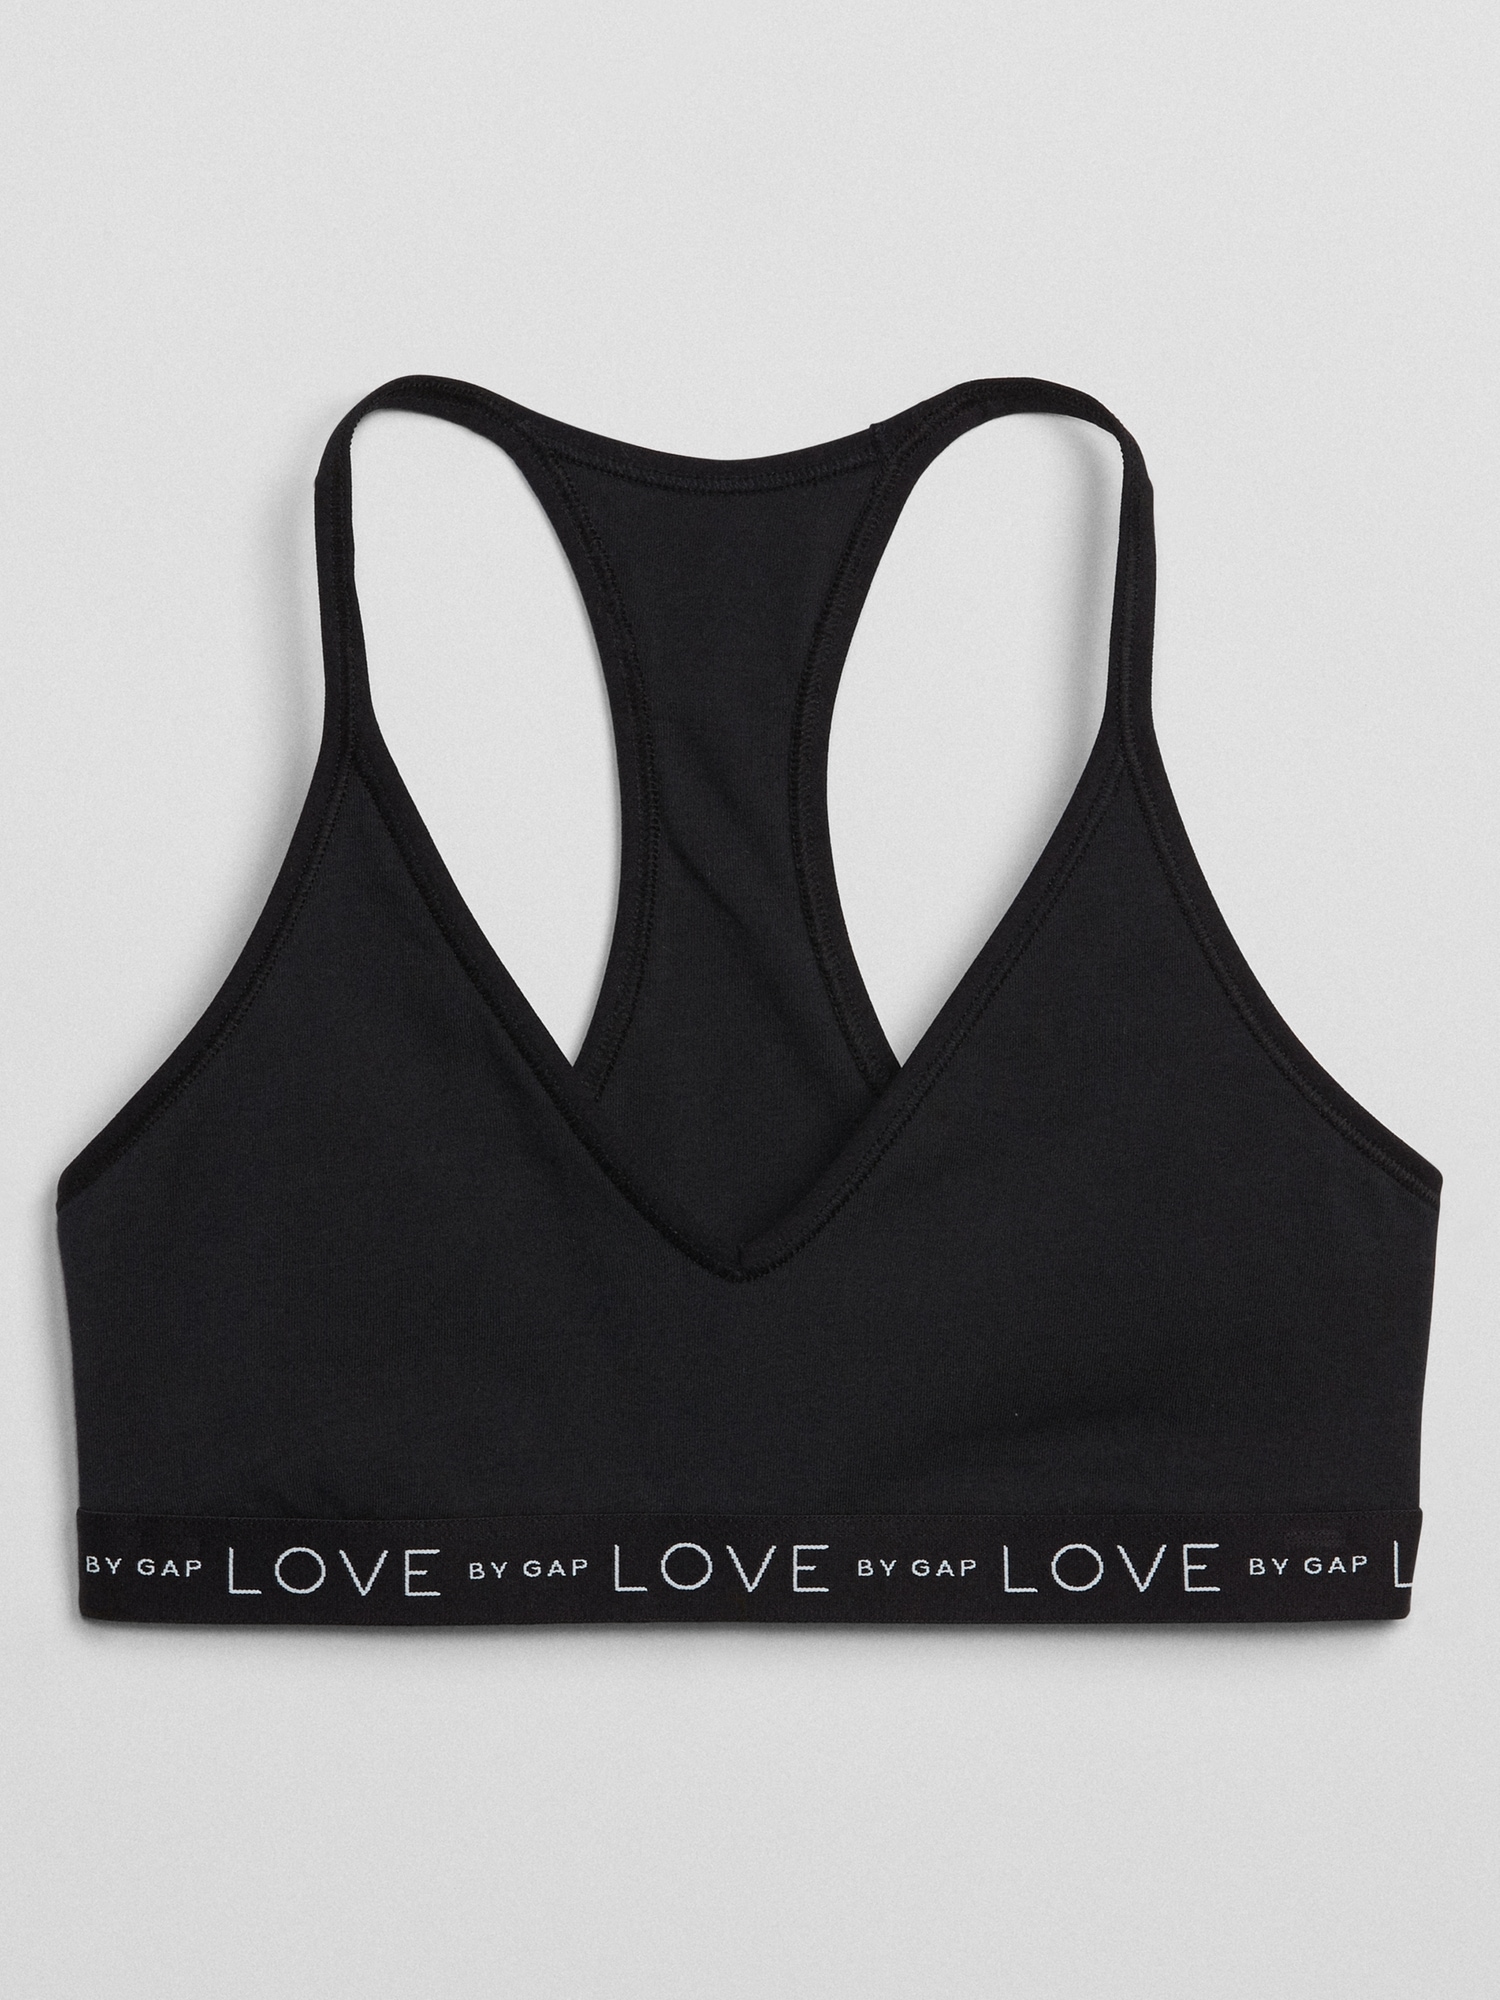 TomboyX Racerback Bra, Cotton for All Day Comfort, No Frills Scoop